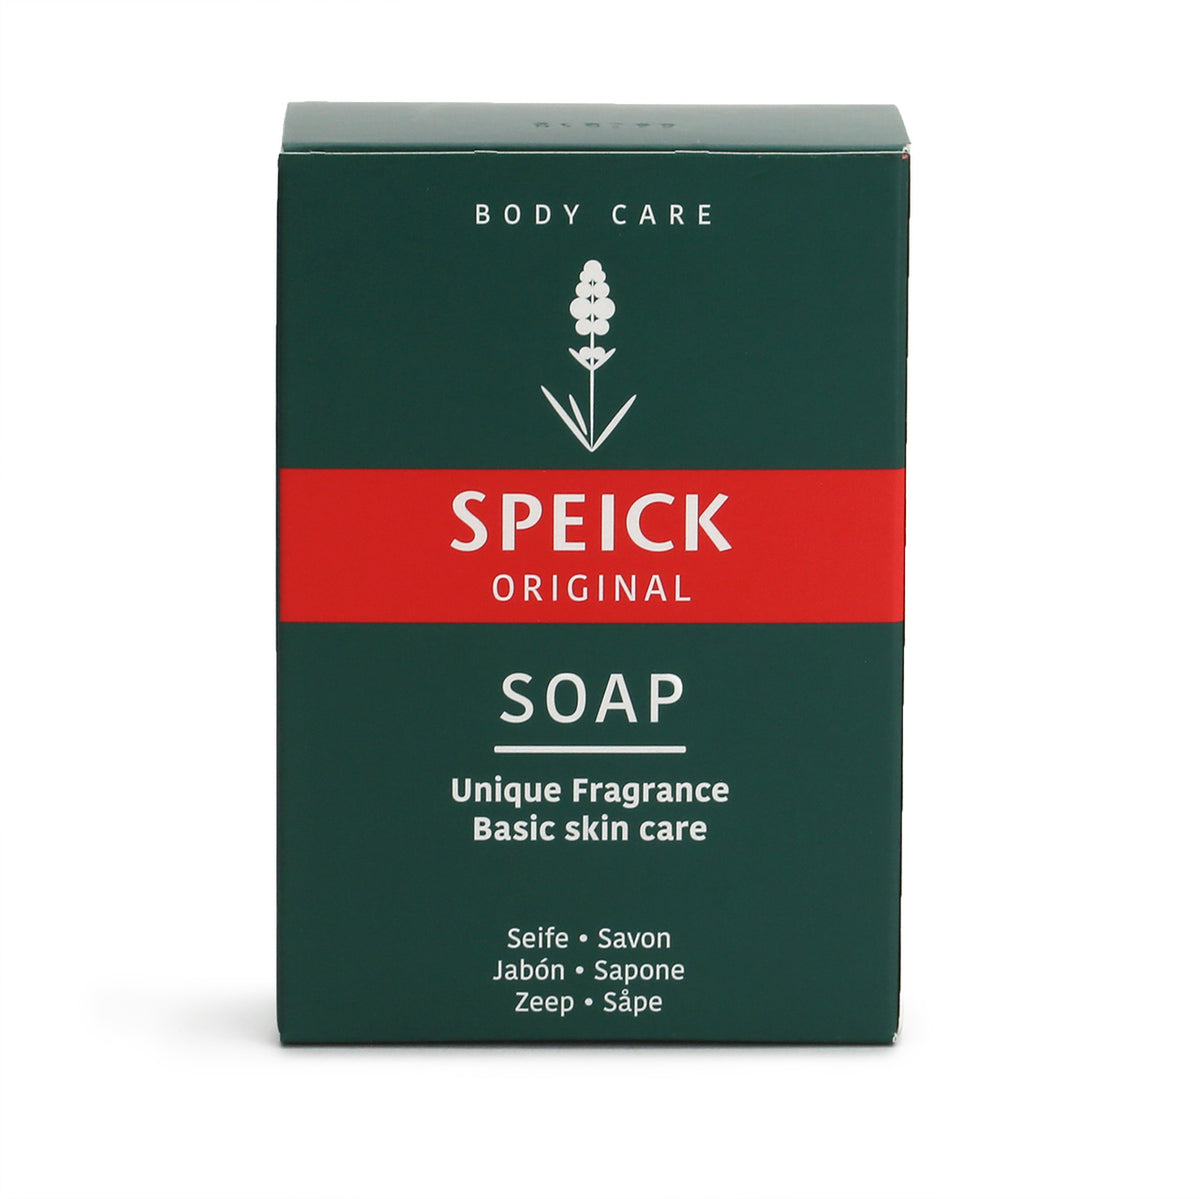 Speick Original body soap green box with red logo panel